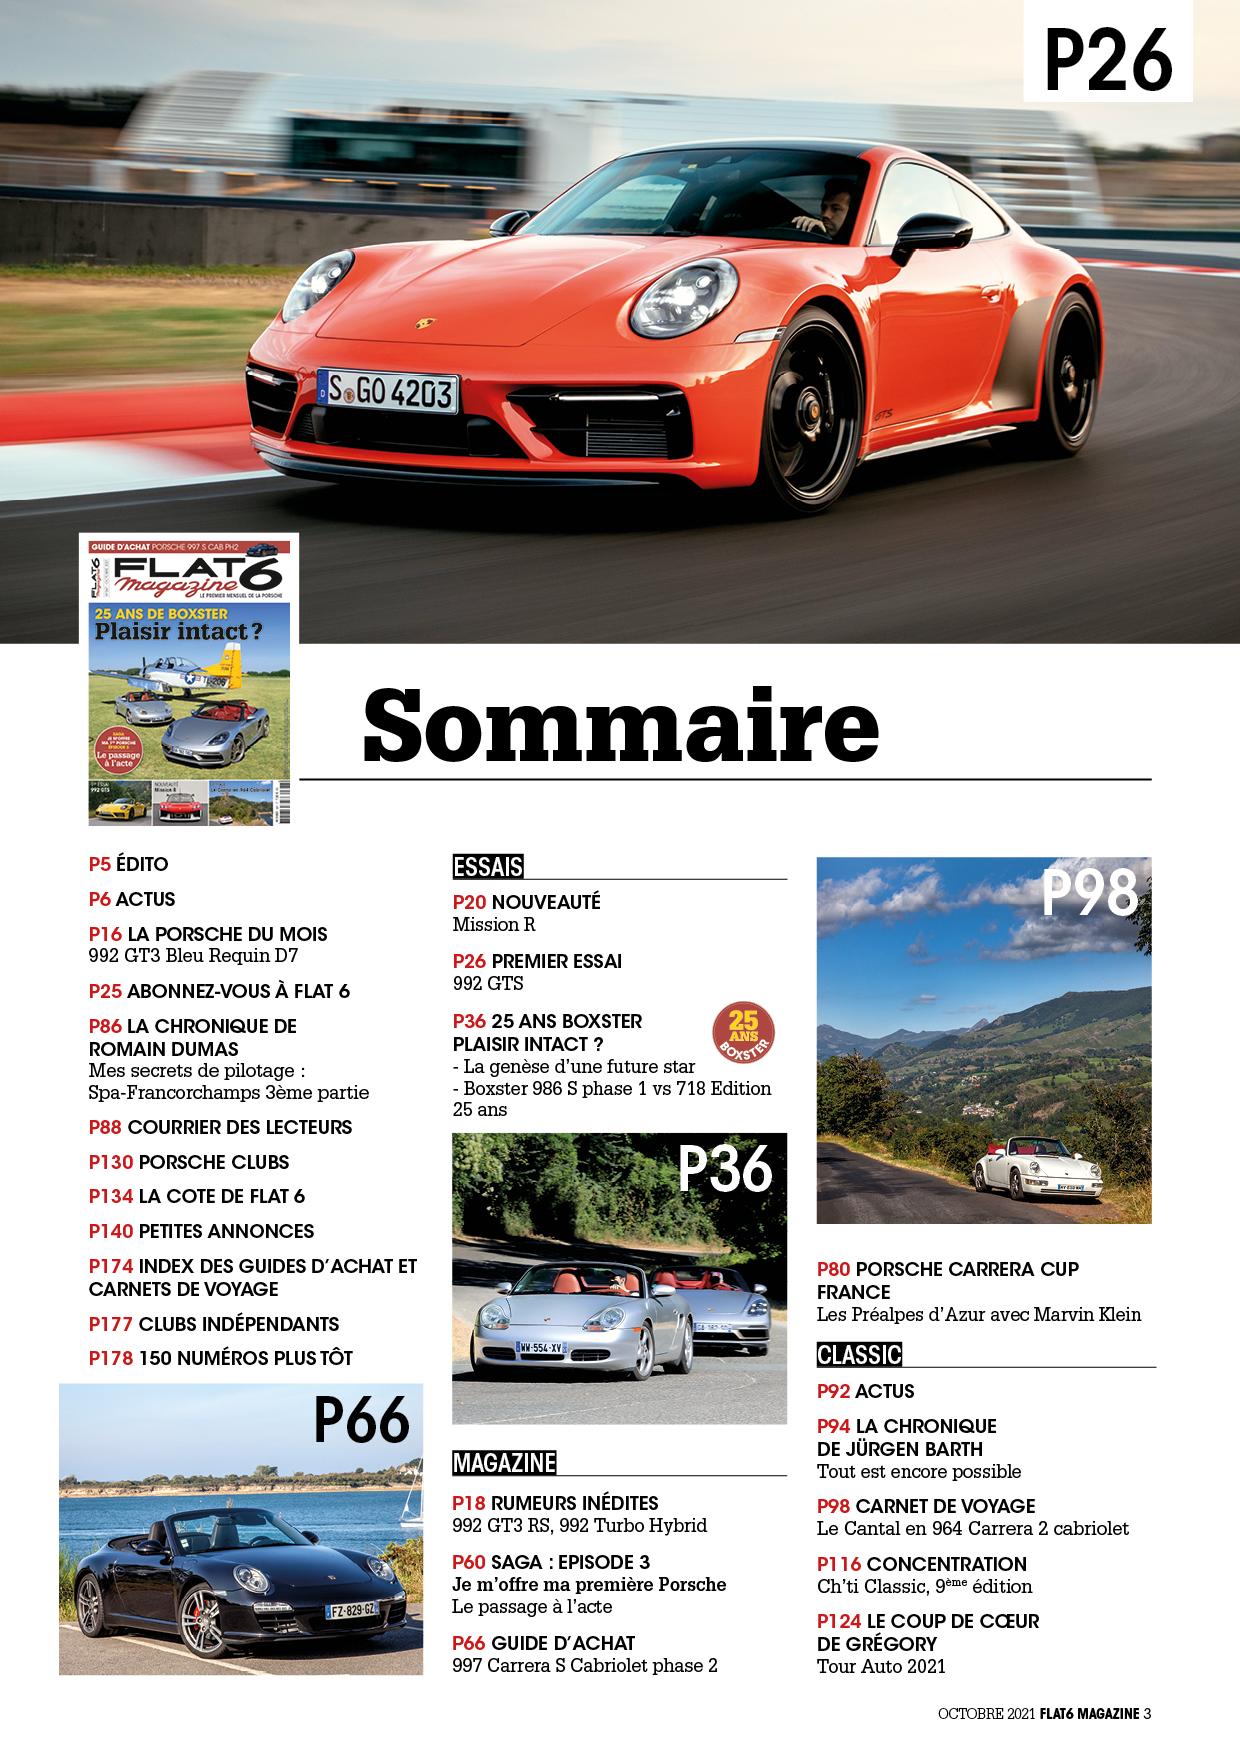 Sommaire367